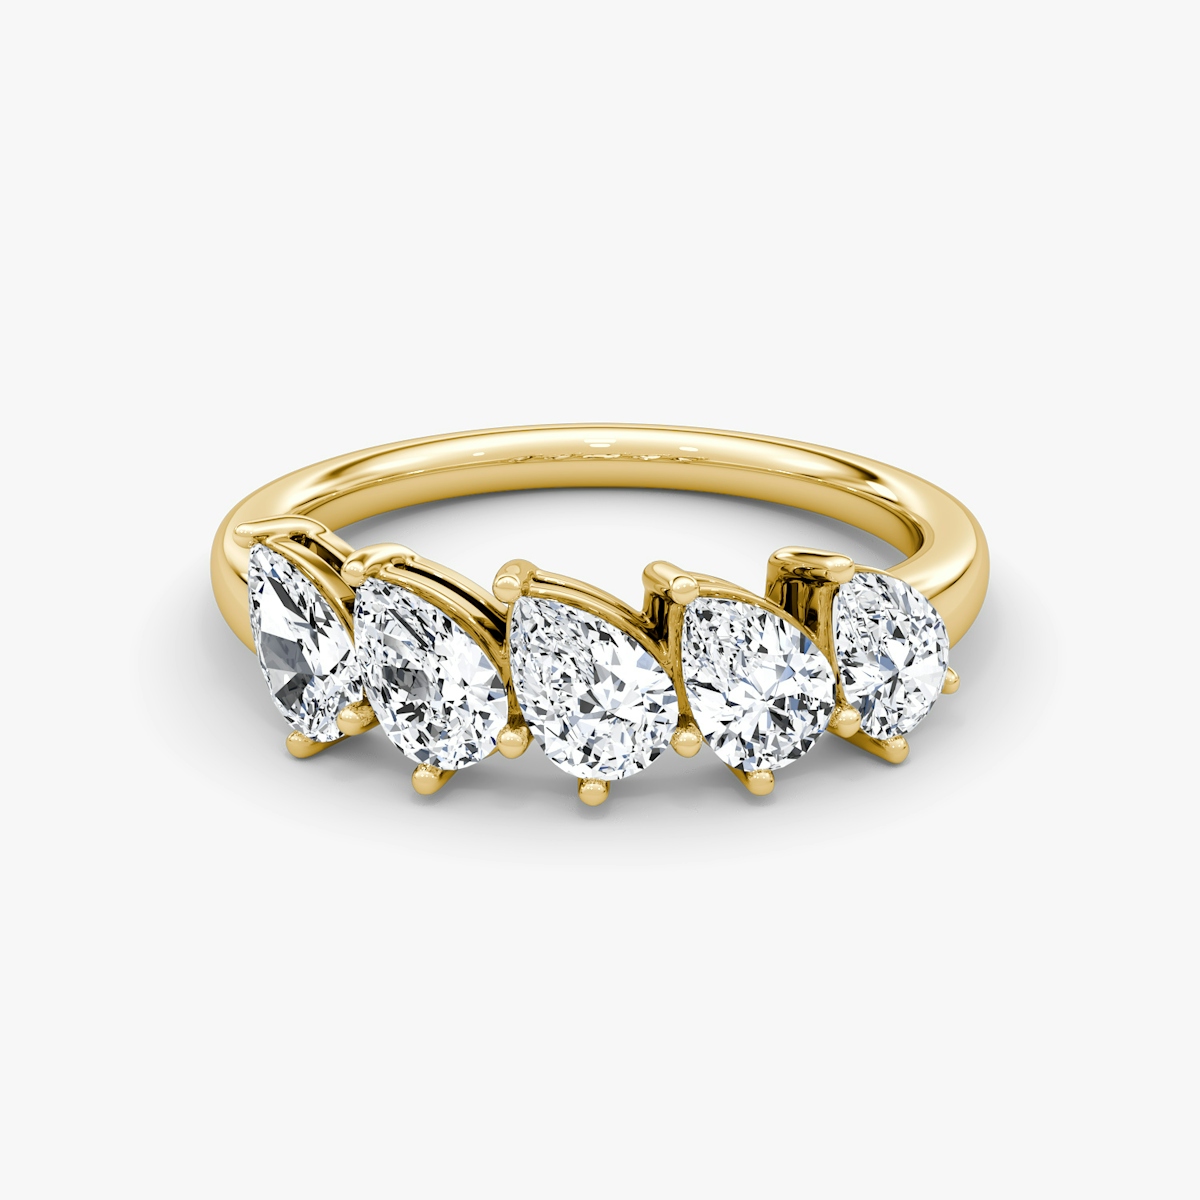 The Five Stone Band Pear Wedding Band in Yellow gold | VRAI